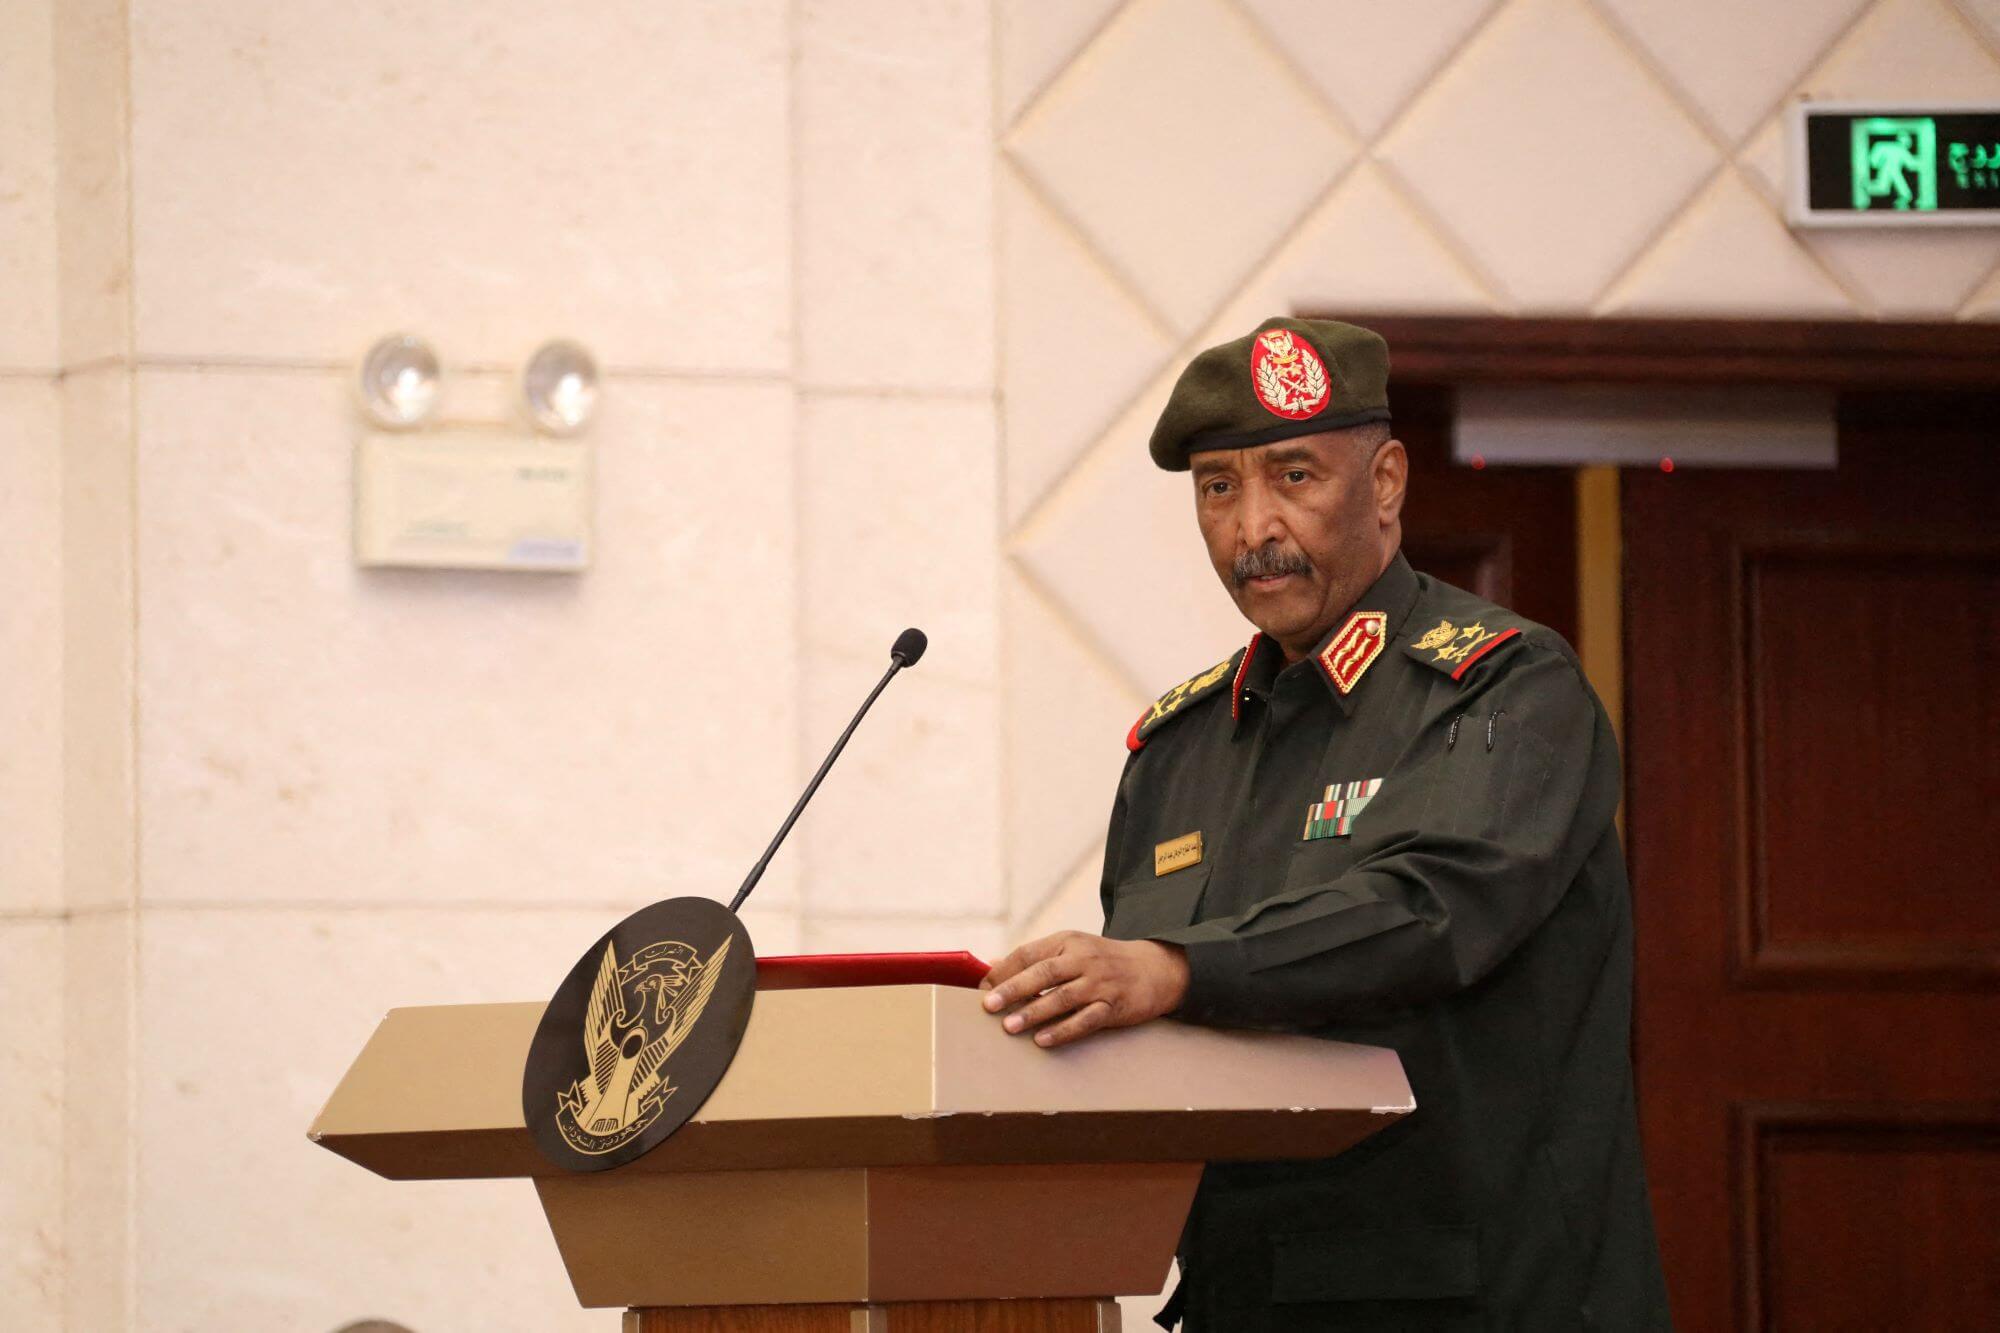 Sudan's military leader General Abdel Fattah al-Burhan stands at the podium during a ceremony to sign the framework agreement between military rulers and civilian powers in Khartoum, Sudan in December 2022. © Reuters